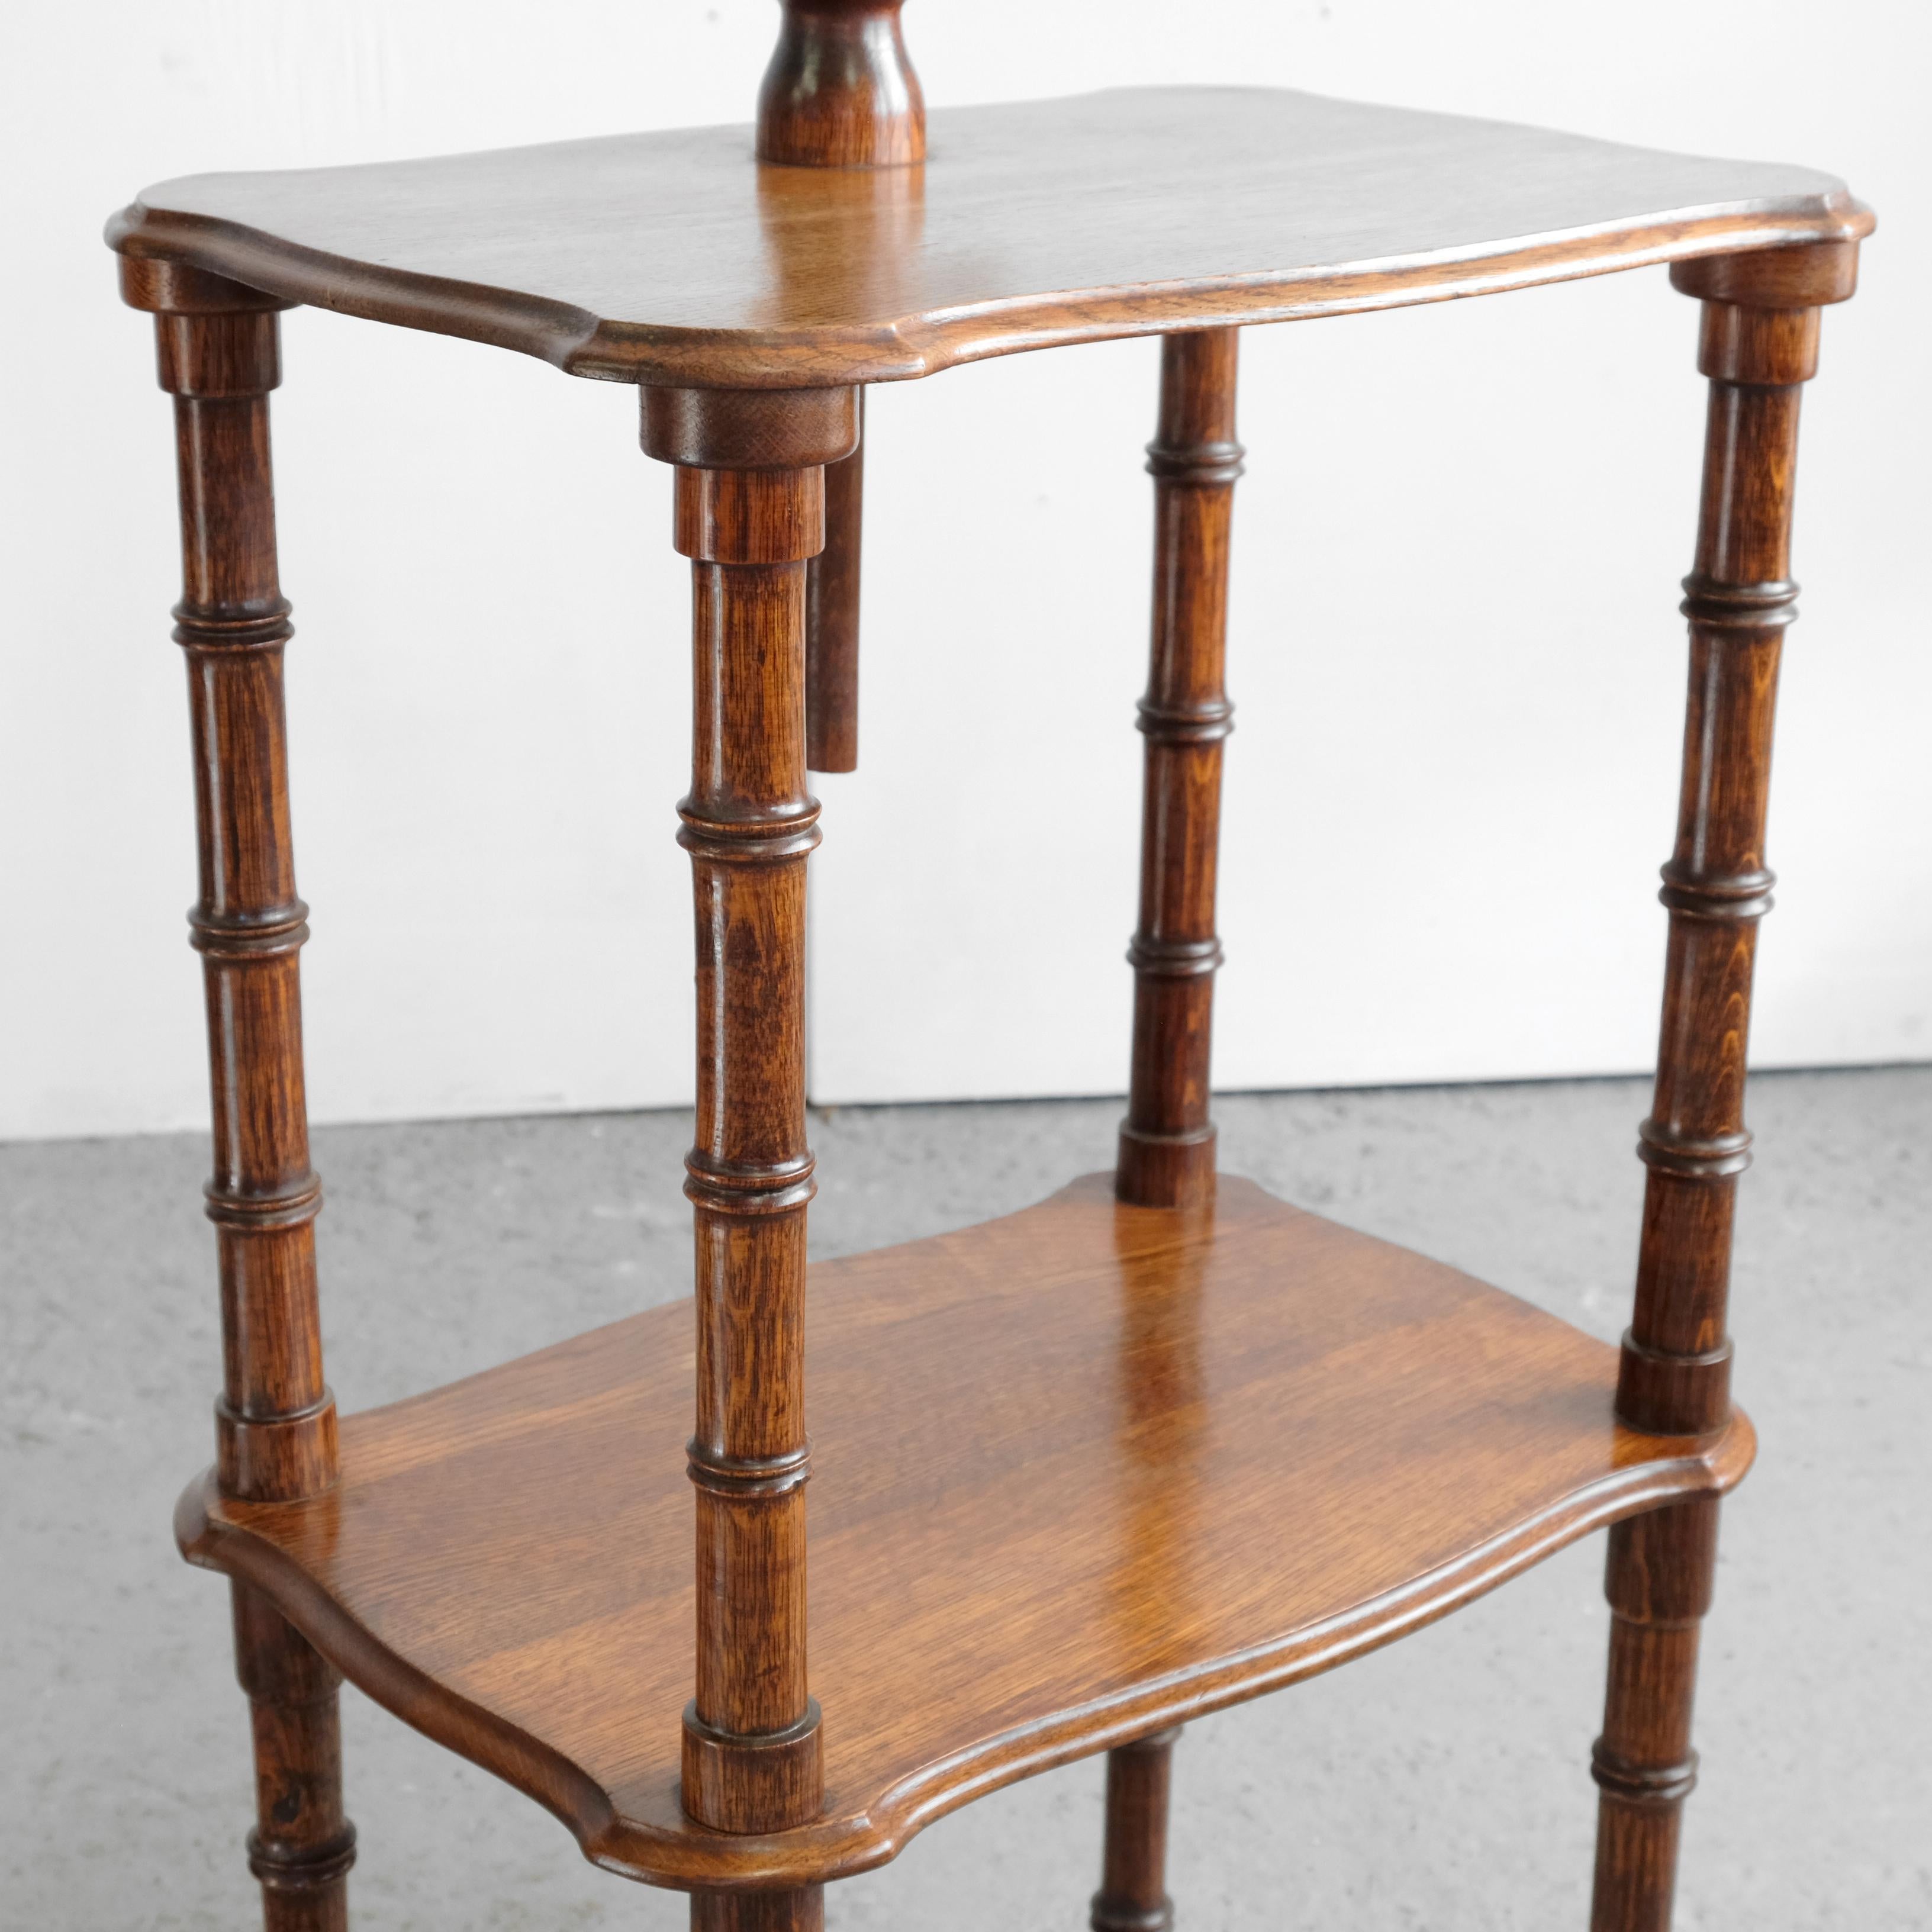 A 19th-century English oak shaving stand. Faux bamboo turned legs, supporting two shaped tiers, the upper having a height-adjustable, tilting and swivelling mirror with two swing-out candle sconces with brass liners. The mirror section turnings are